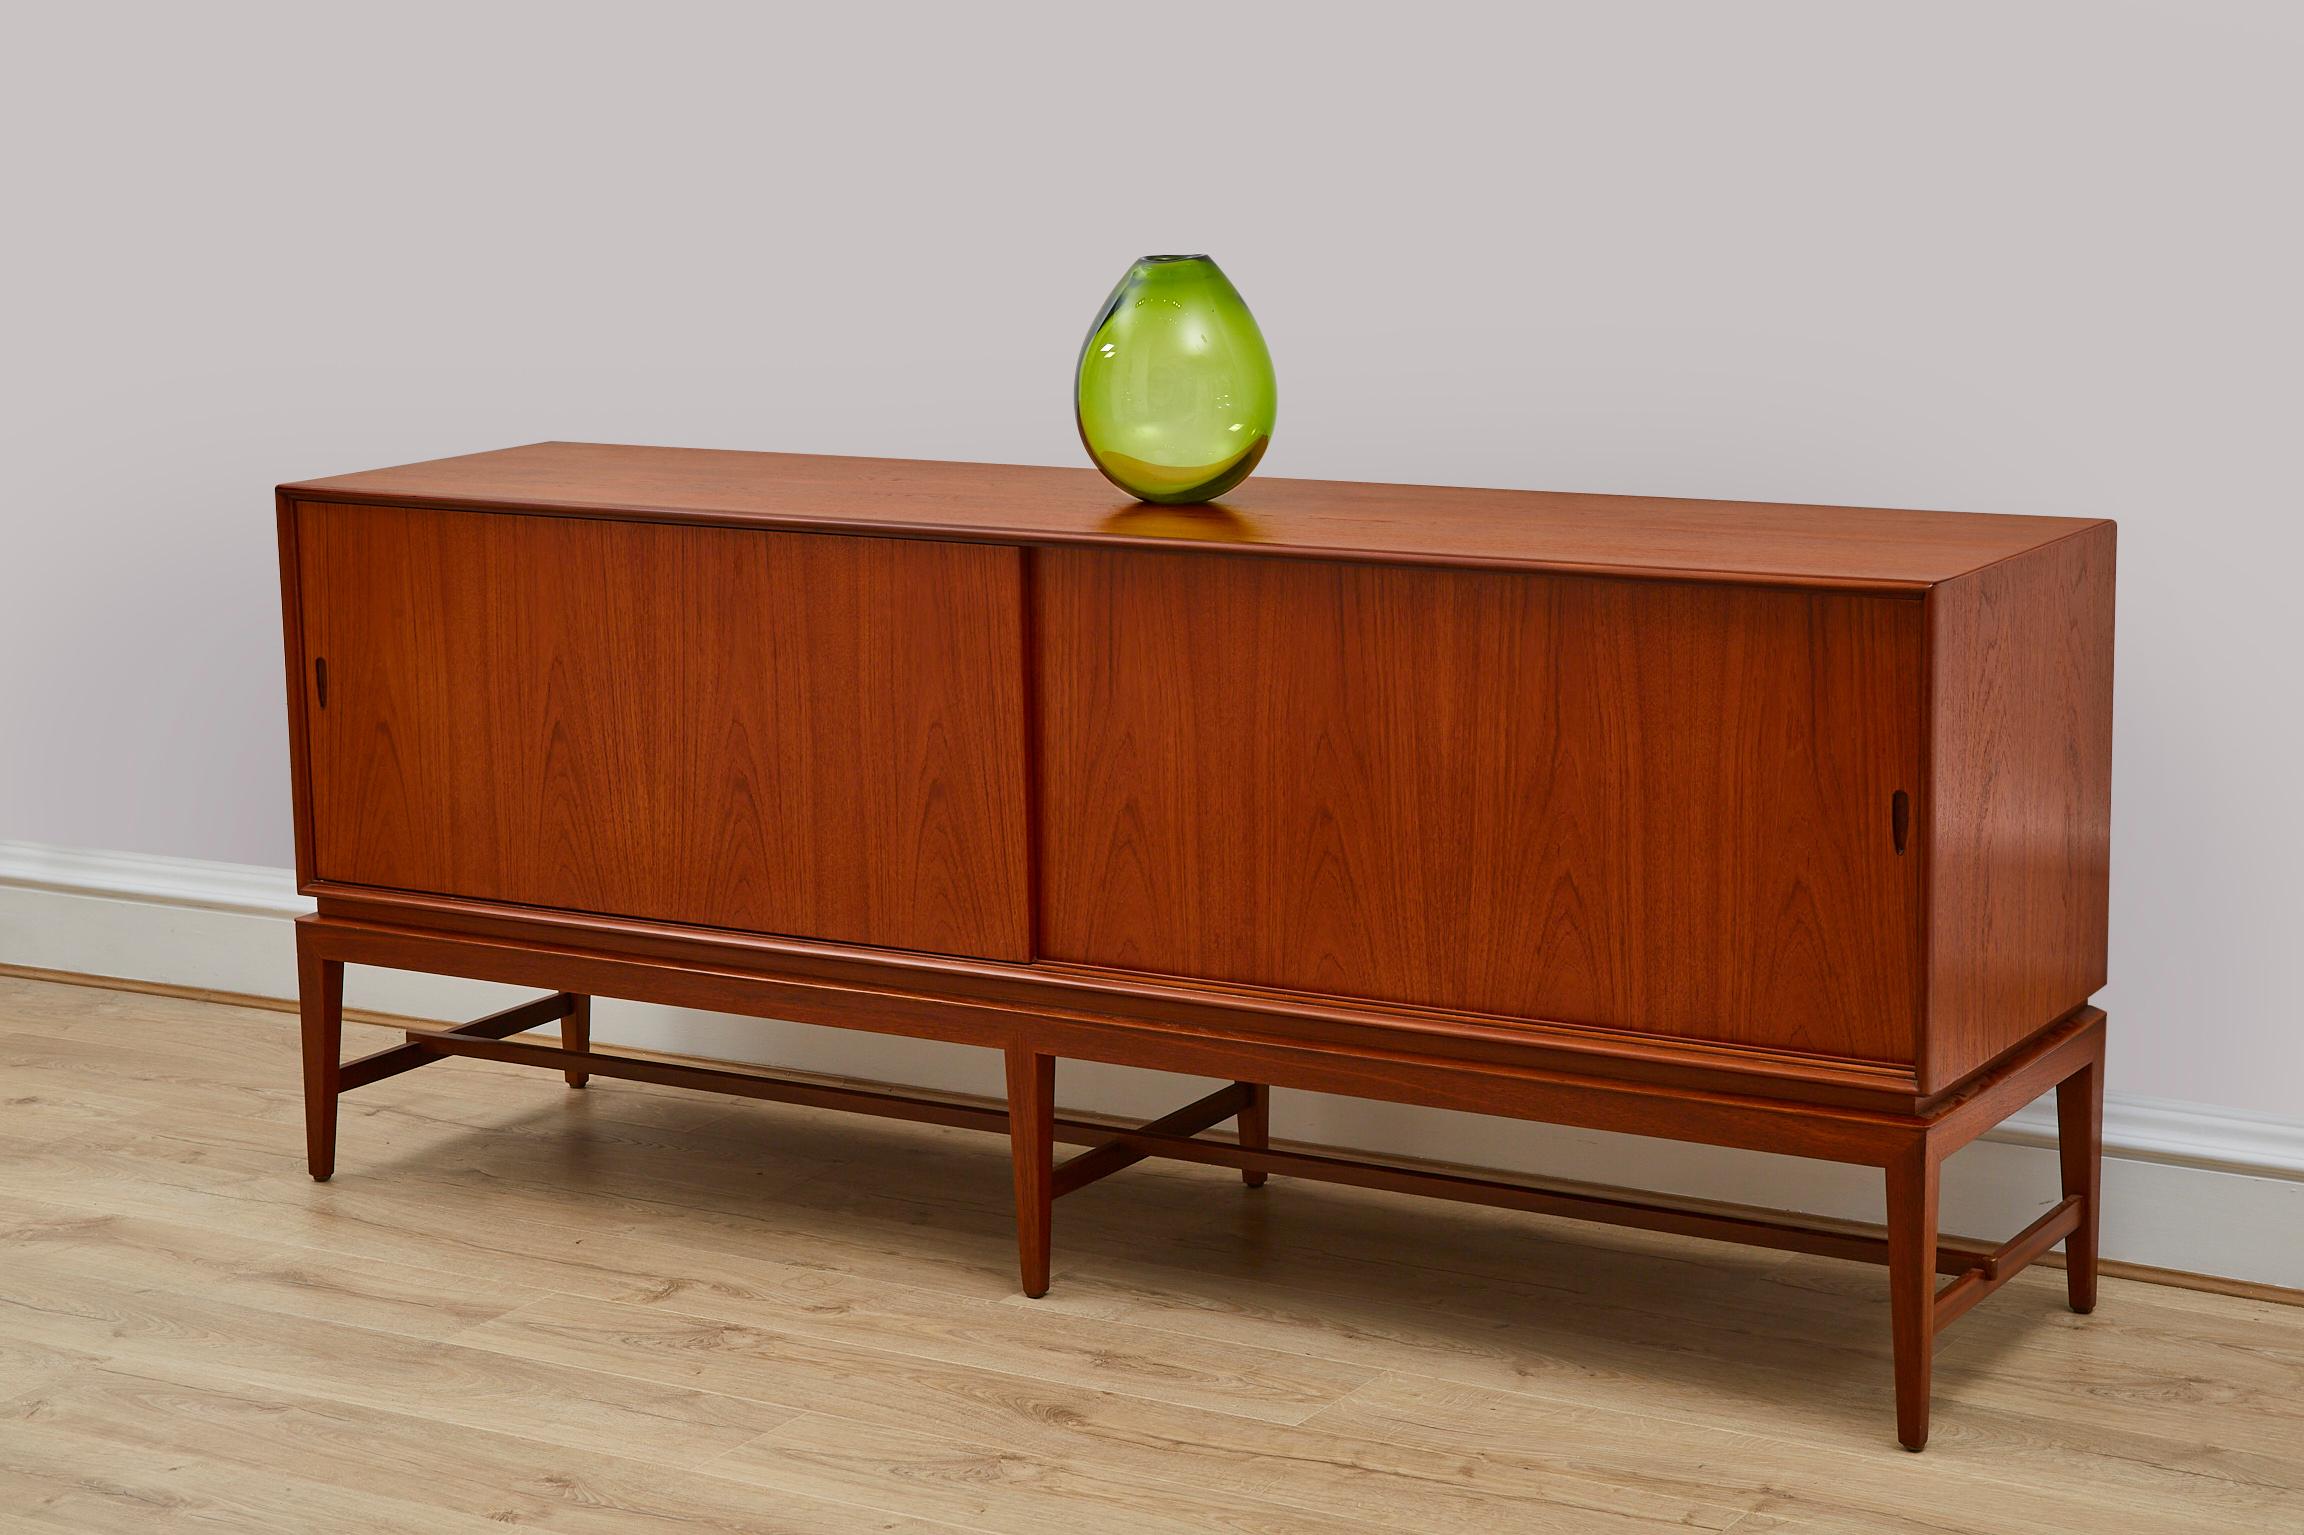 A sideboard designed by Severin Hansen. It was produced in the 1960s in Denmark. Covered with Teak veneer. The sideboard has a roomy interior, shelves, and drawers behind a sliding door.


Danish furniture designer Severin Hansen Jr. is best